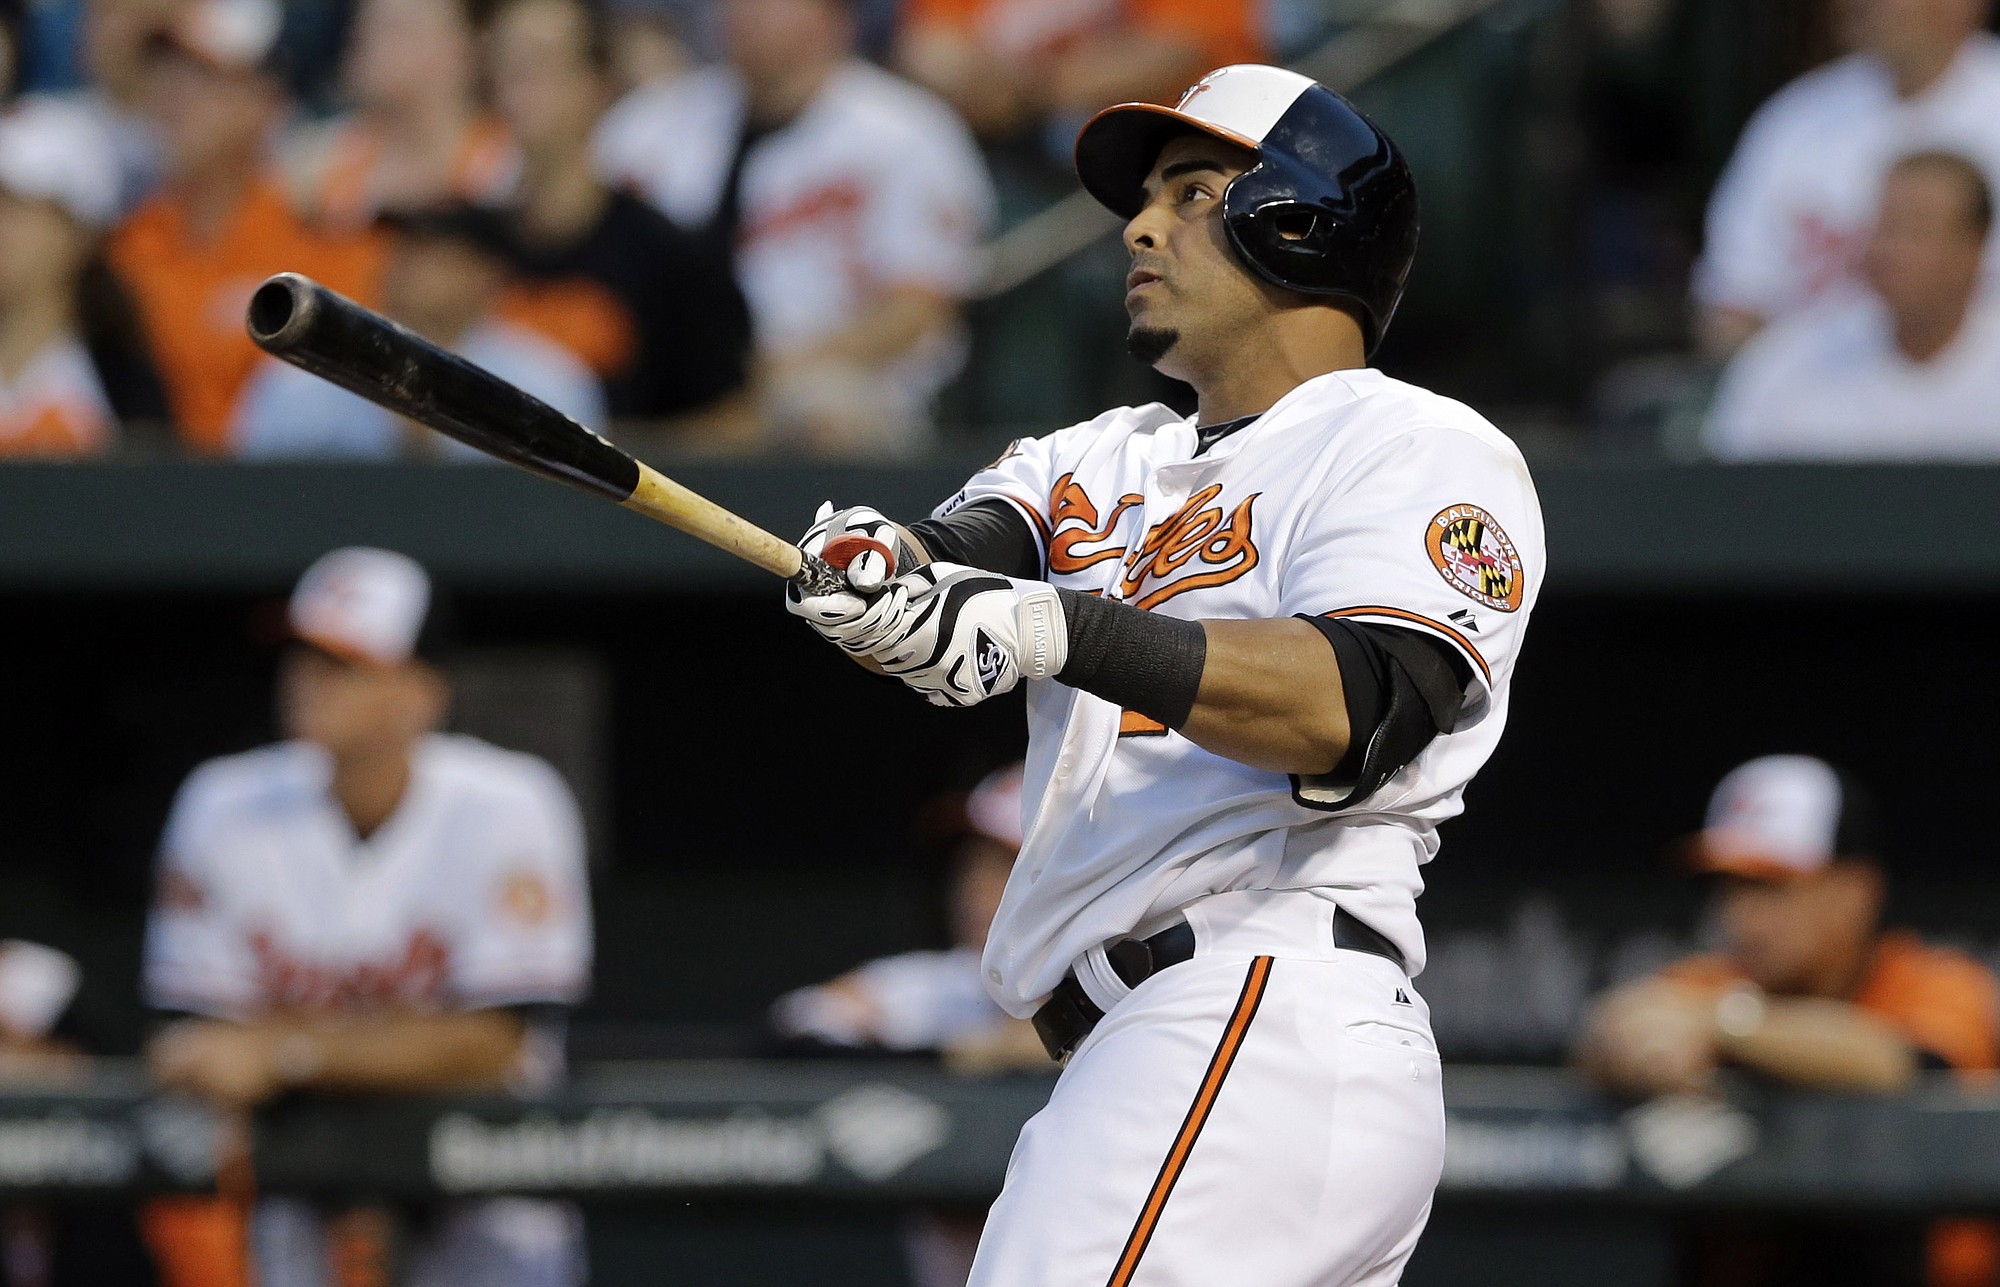 The Seattle Mariners and free agent slugger Nelson Cruz are nearing agreement on a contact that would give Seattle the right-handed bat it has sought.